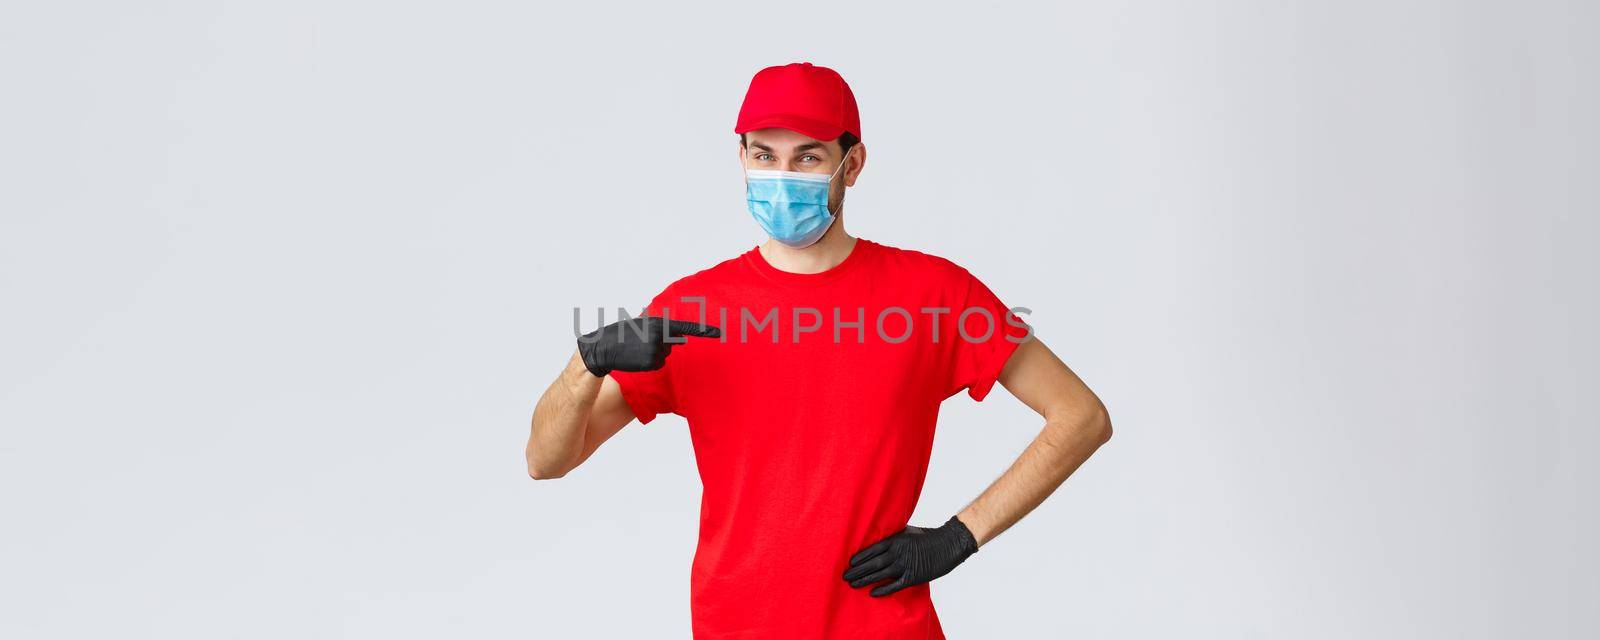 Covid-19, self-quarantine, online shopping concept. Confident smiling delivery guy in face mask, gloves in uniform, pointing himself. Courier provide fast shipping during coronavirus outbreak.